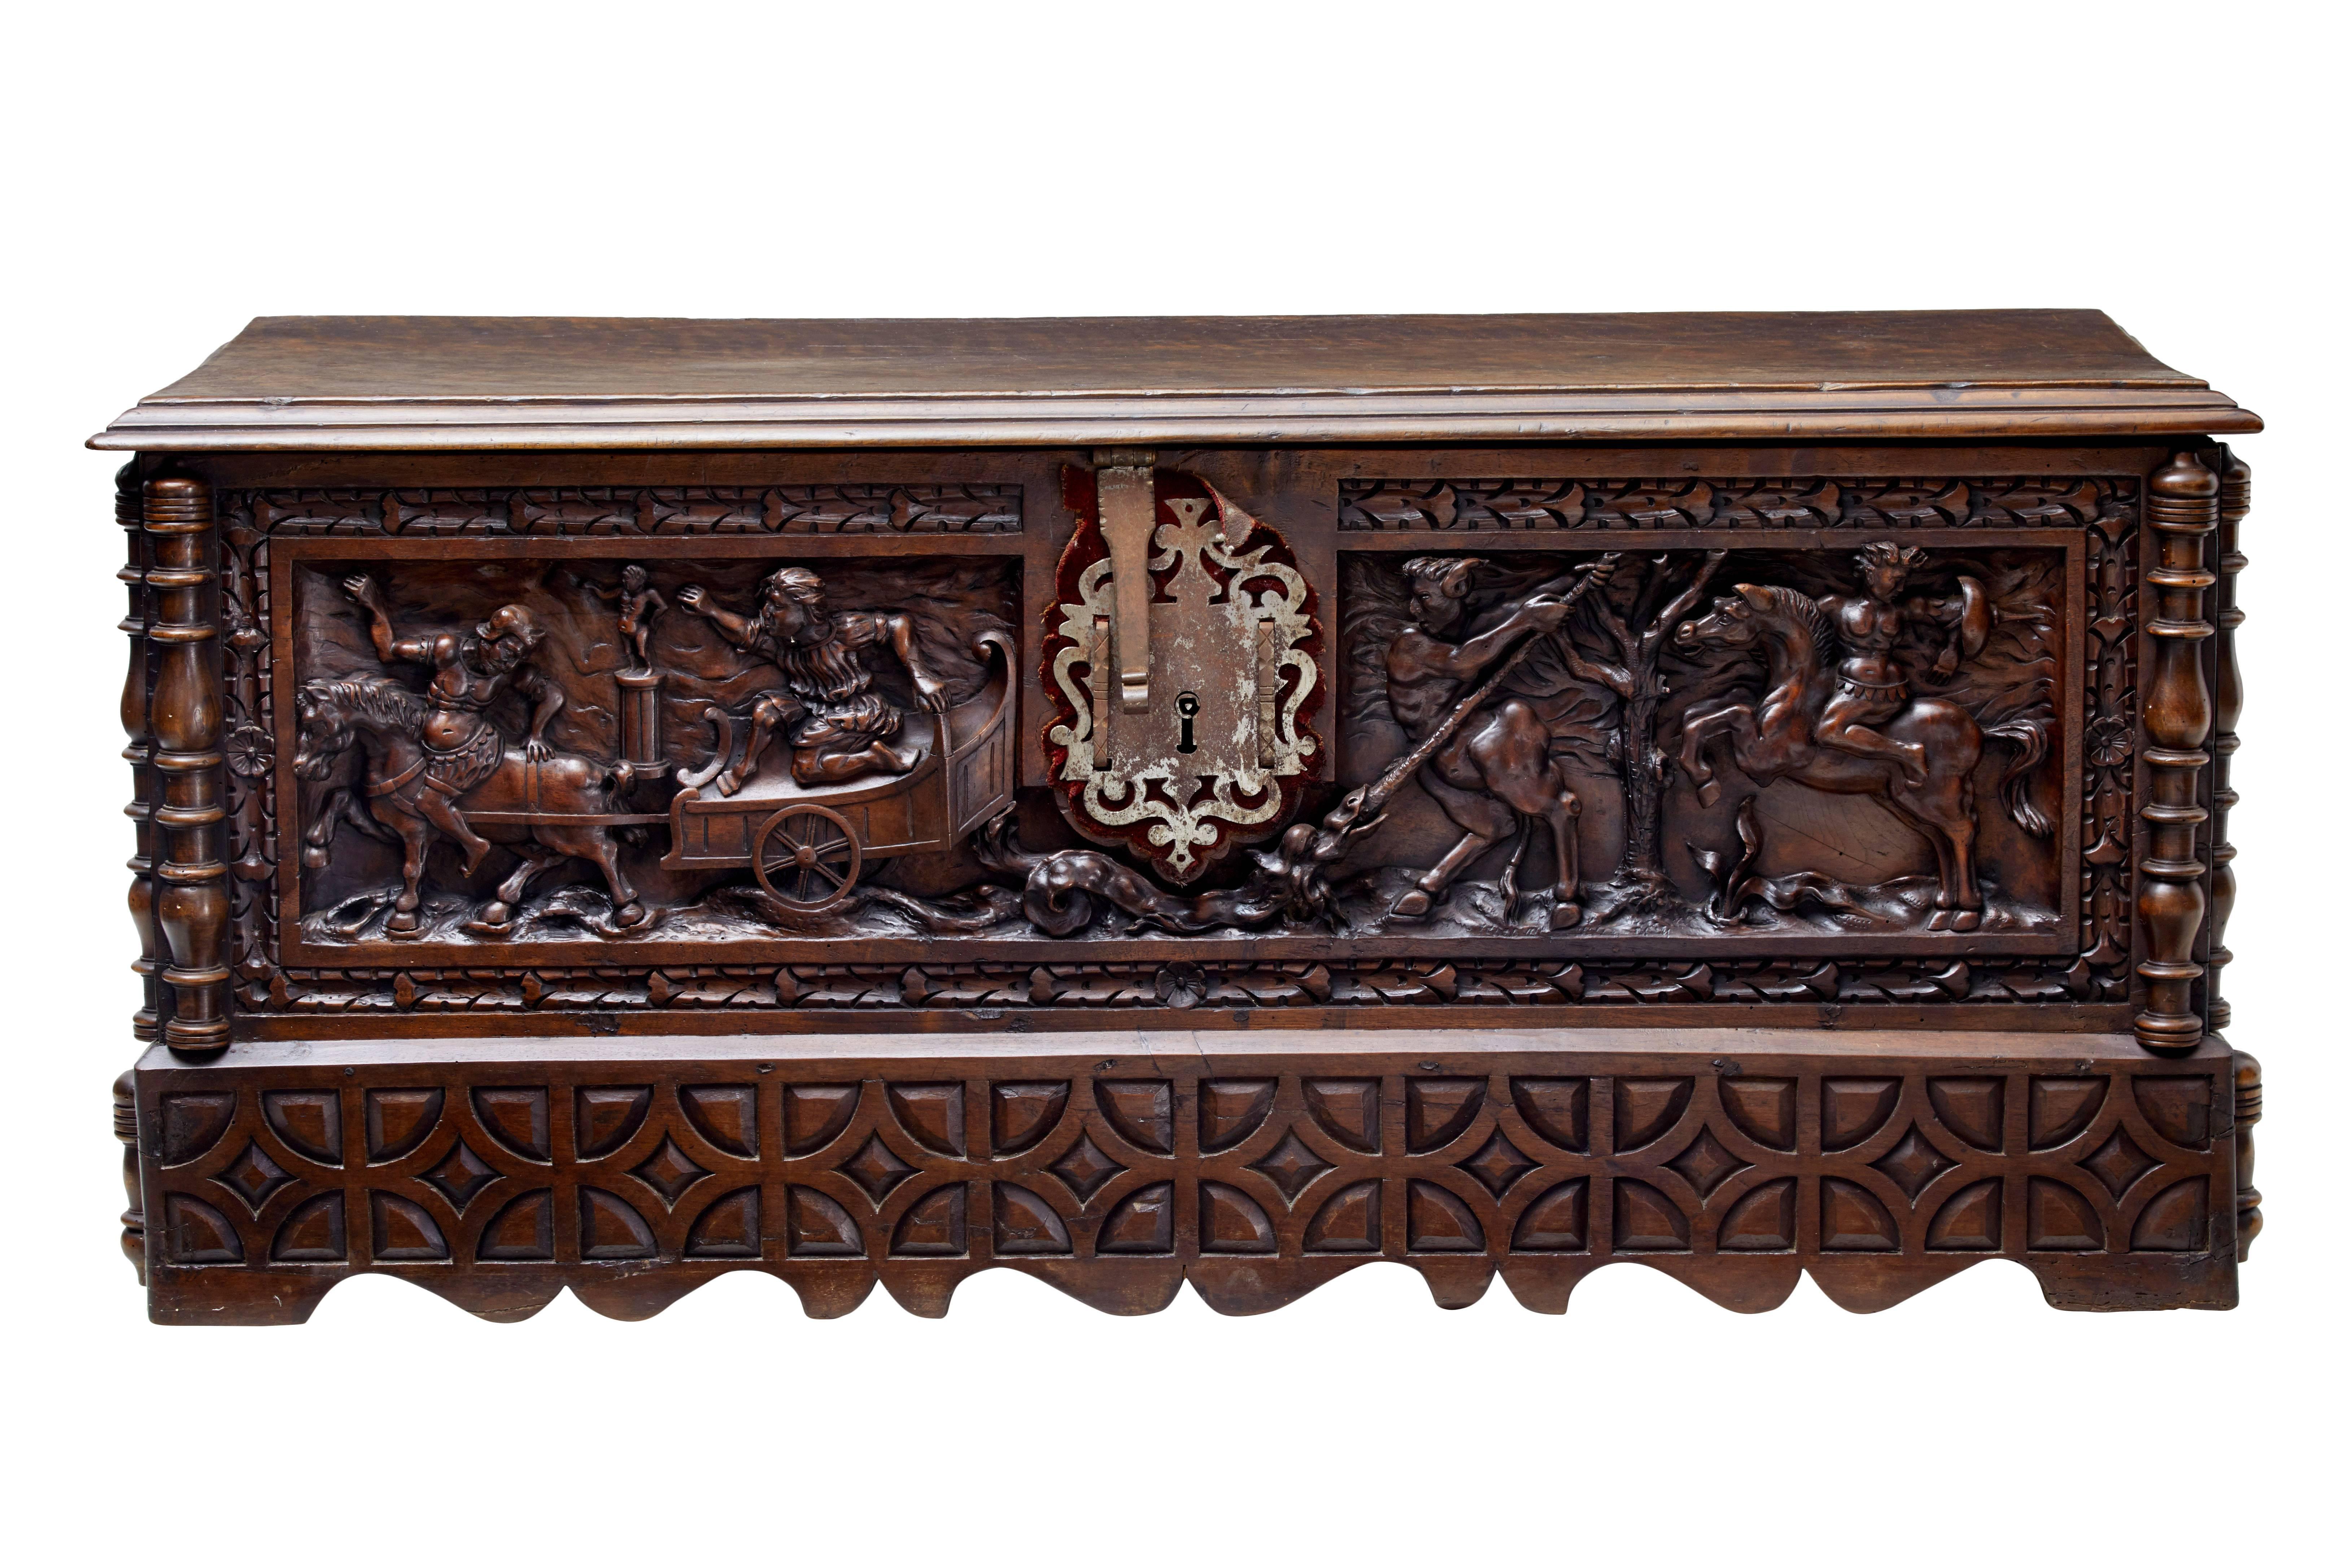 Fine quality Italian carved cassone, circa 1800.

Beautifully carved in the solid, depicting figures and mythical creatures to the front panel.

Turned spindles to the corners. Original metalwork, no key.

Standing on shaped and carved